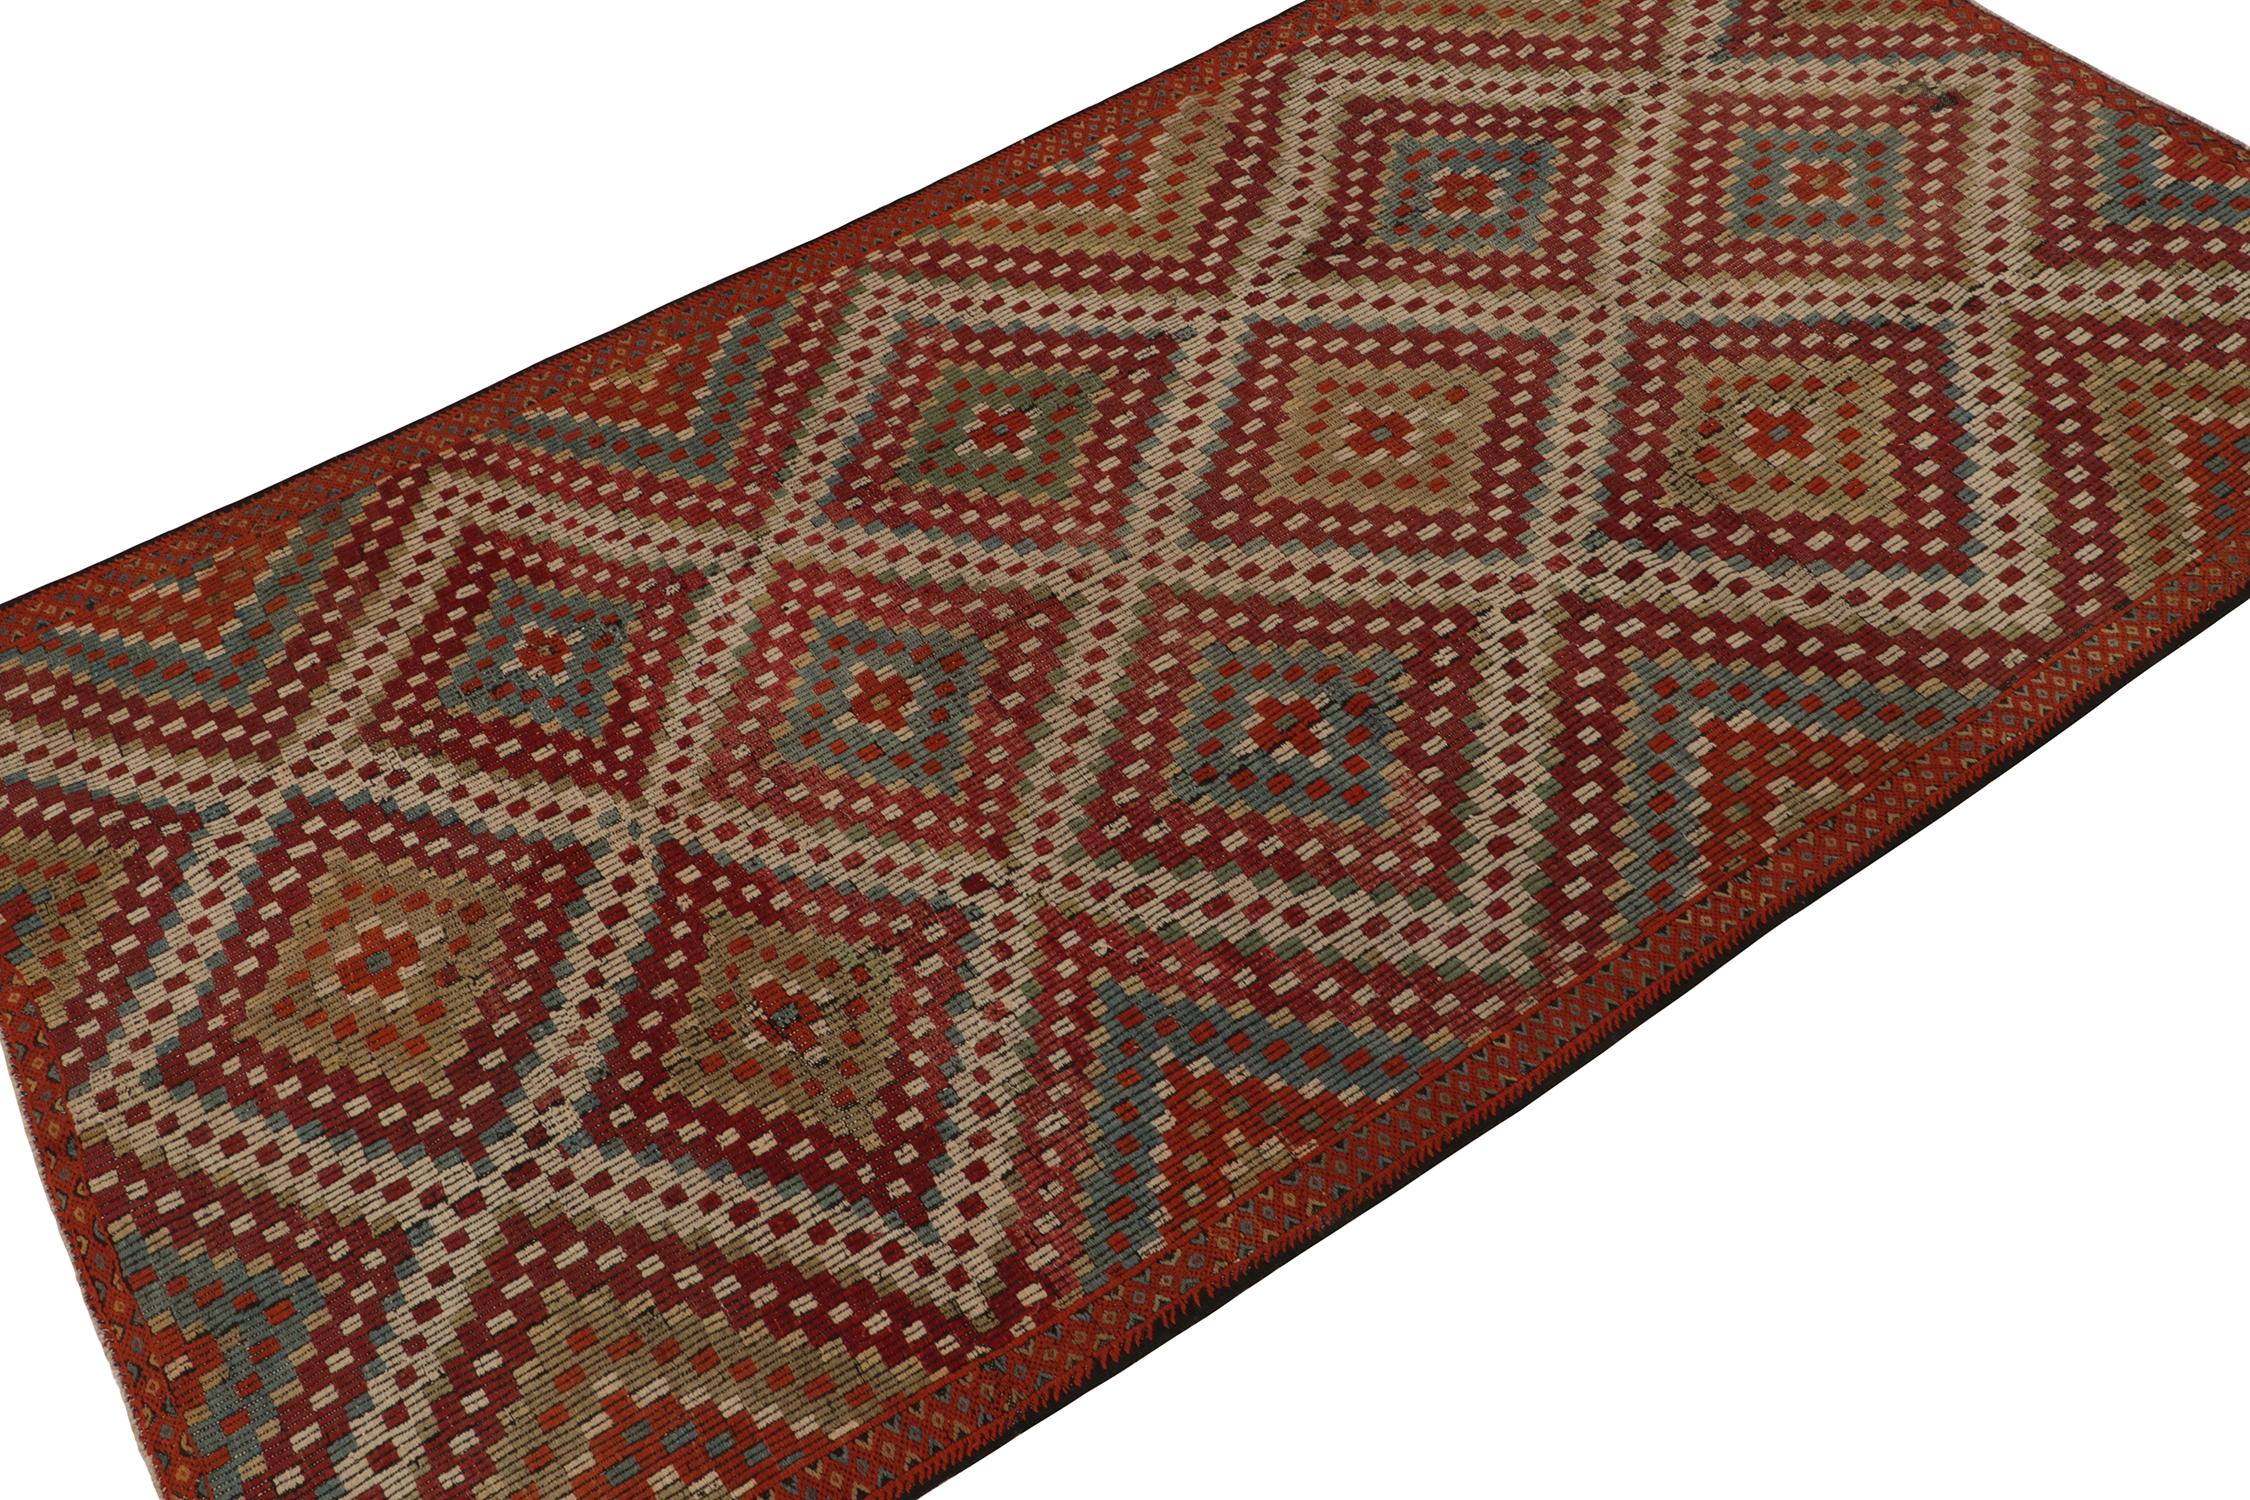 Originating from Turkey circa 1950-1960, a vintage Chaput style kilim rug connoting elaborate tribal sensibilities. Handwoven in wool, the piece exhibits a play of blue and green atop a red background with elaborate traditional diamond patterns.